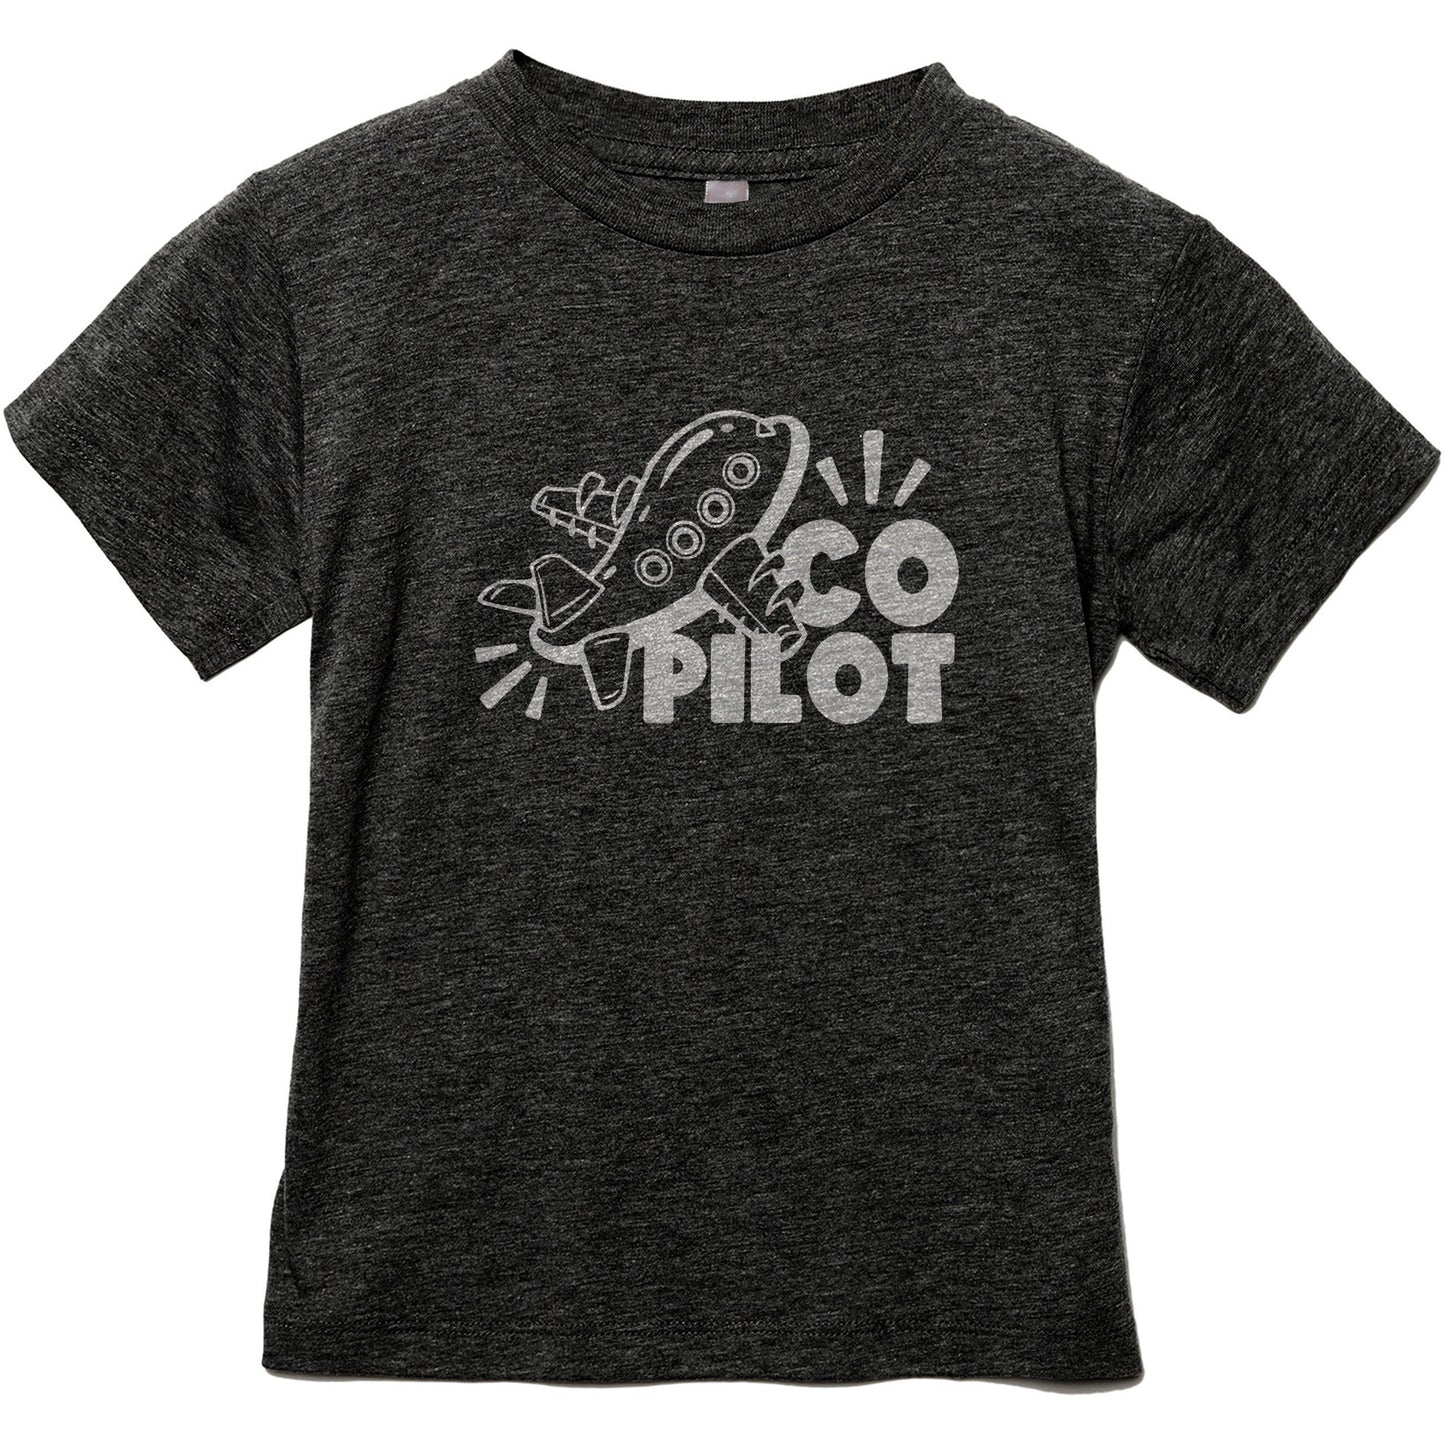 Co-Pilot - thread tank | Stories you can wear.